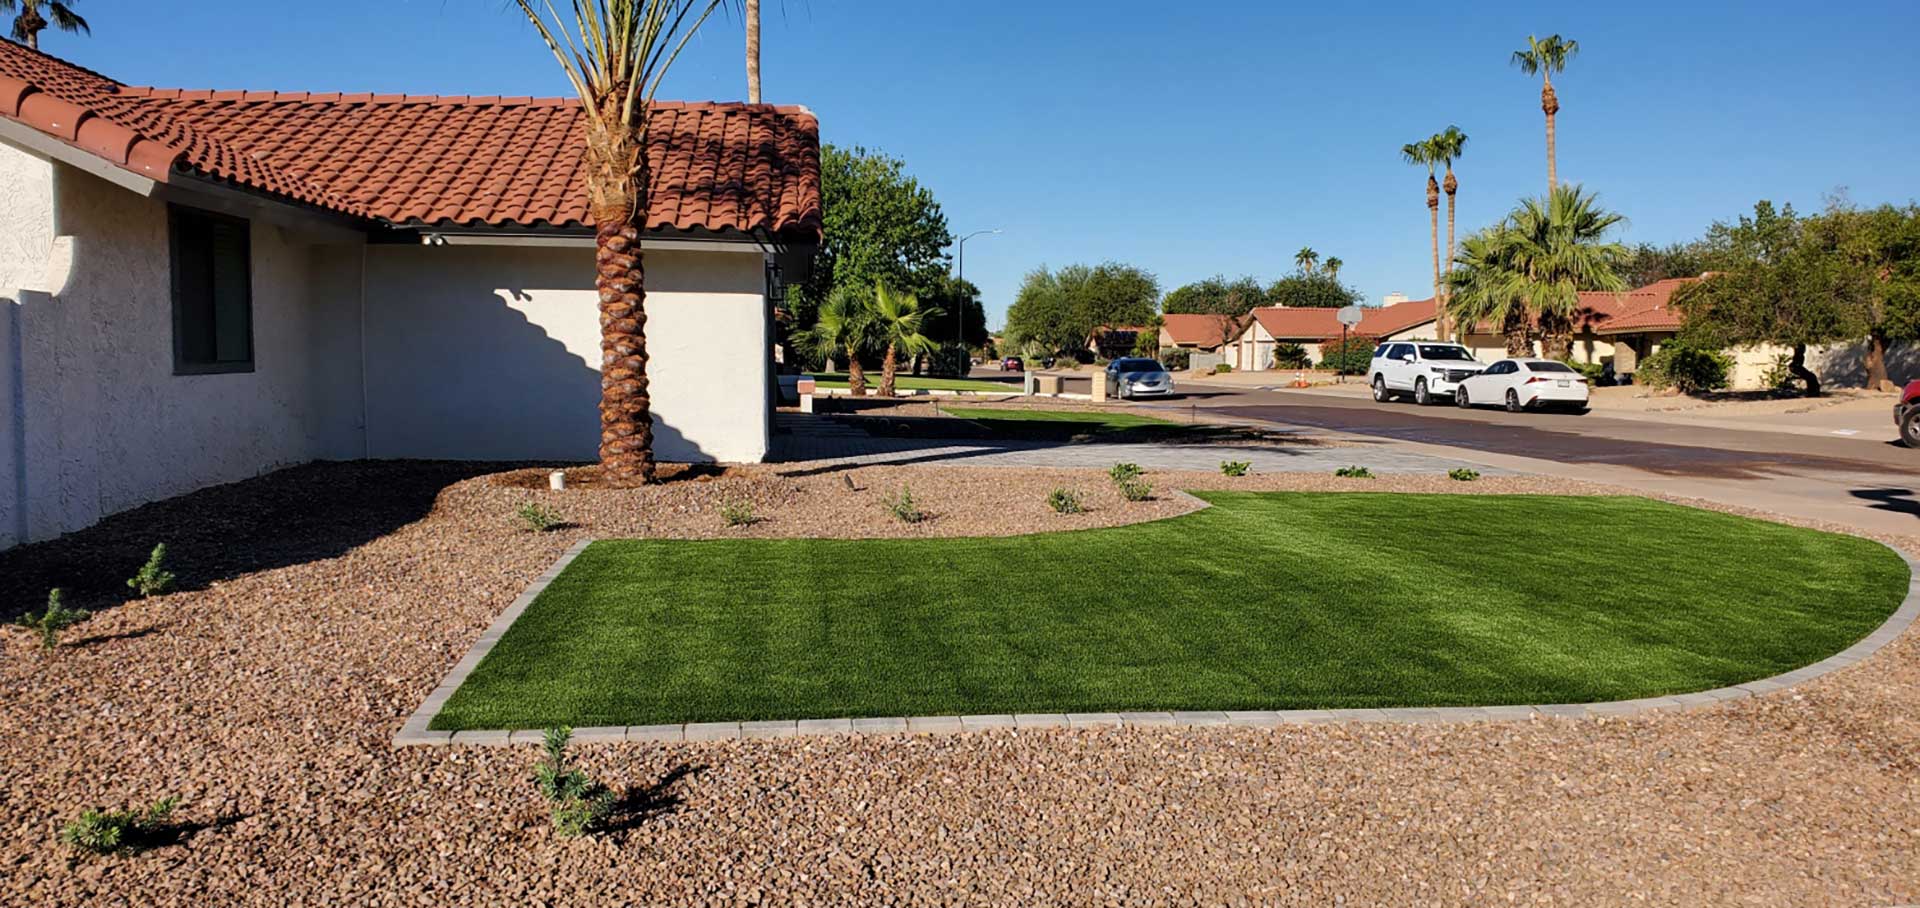 Fresh lawn turf and rock mulch installed at a home in Scottsdale, AZ.